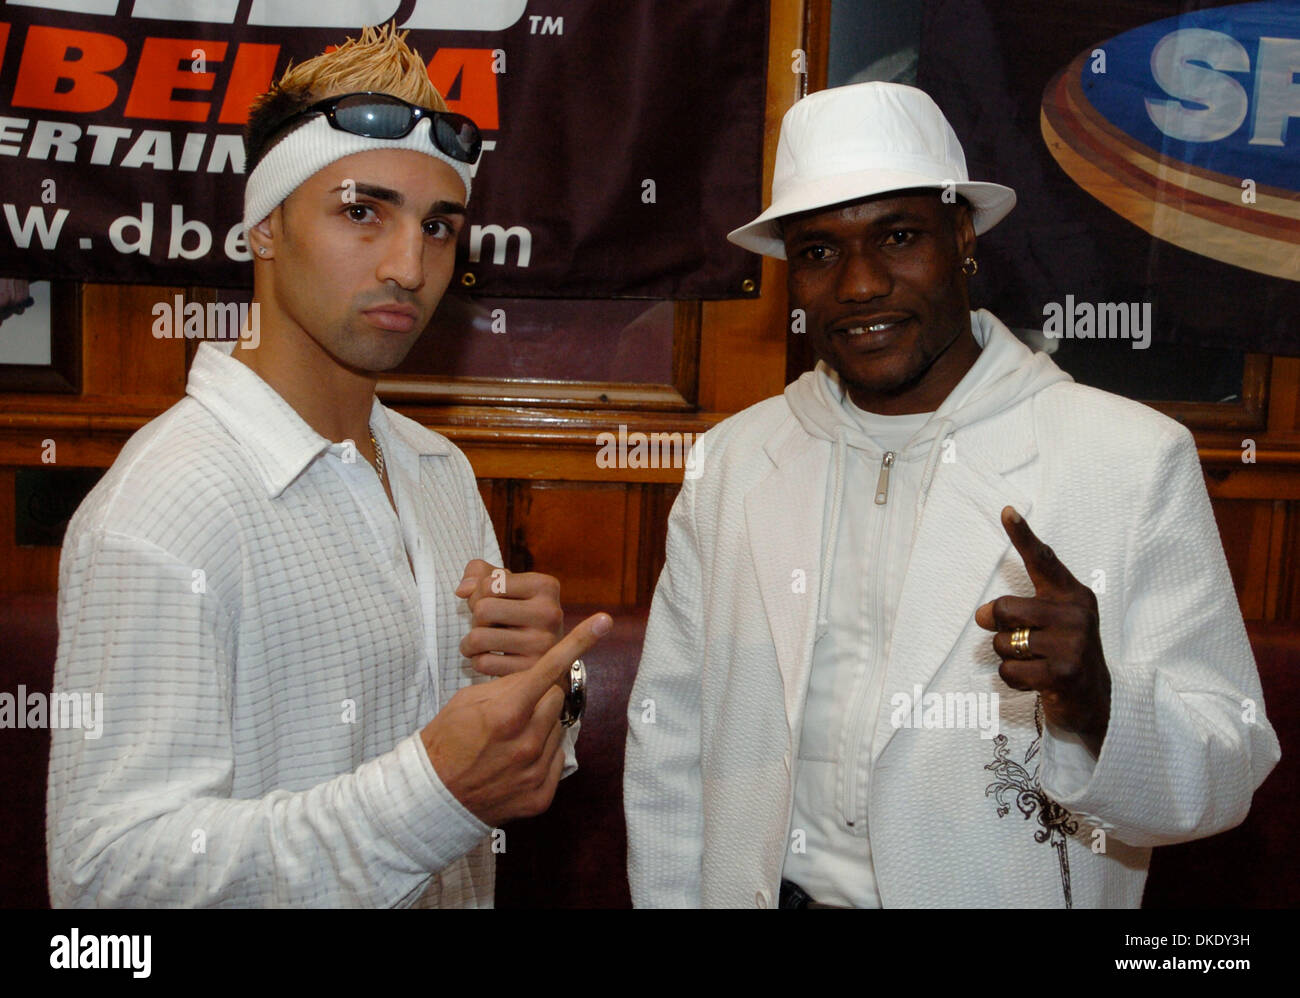 Jun 13, 2007 - Manhattan, NY, USA - Challenger PAULIE MALIGNAGGI (L) and title holder LOVEMORE N'DOU (R) pose for a photograph. Gallagher's Steakhouse hosts a press conference promoting the IBF Junior Welterweight Championship bout as Paulie Maliginaggi, of Bensonhurst Brooklyn challenges veteran world titlist Lovemore N'dou this Saturday night, June 16 at Mohegan Sun Arena in Conn Stock Photo